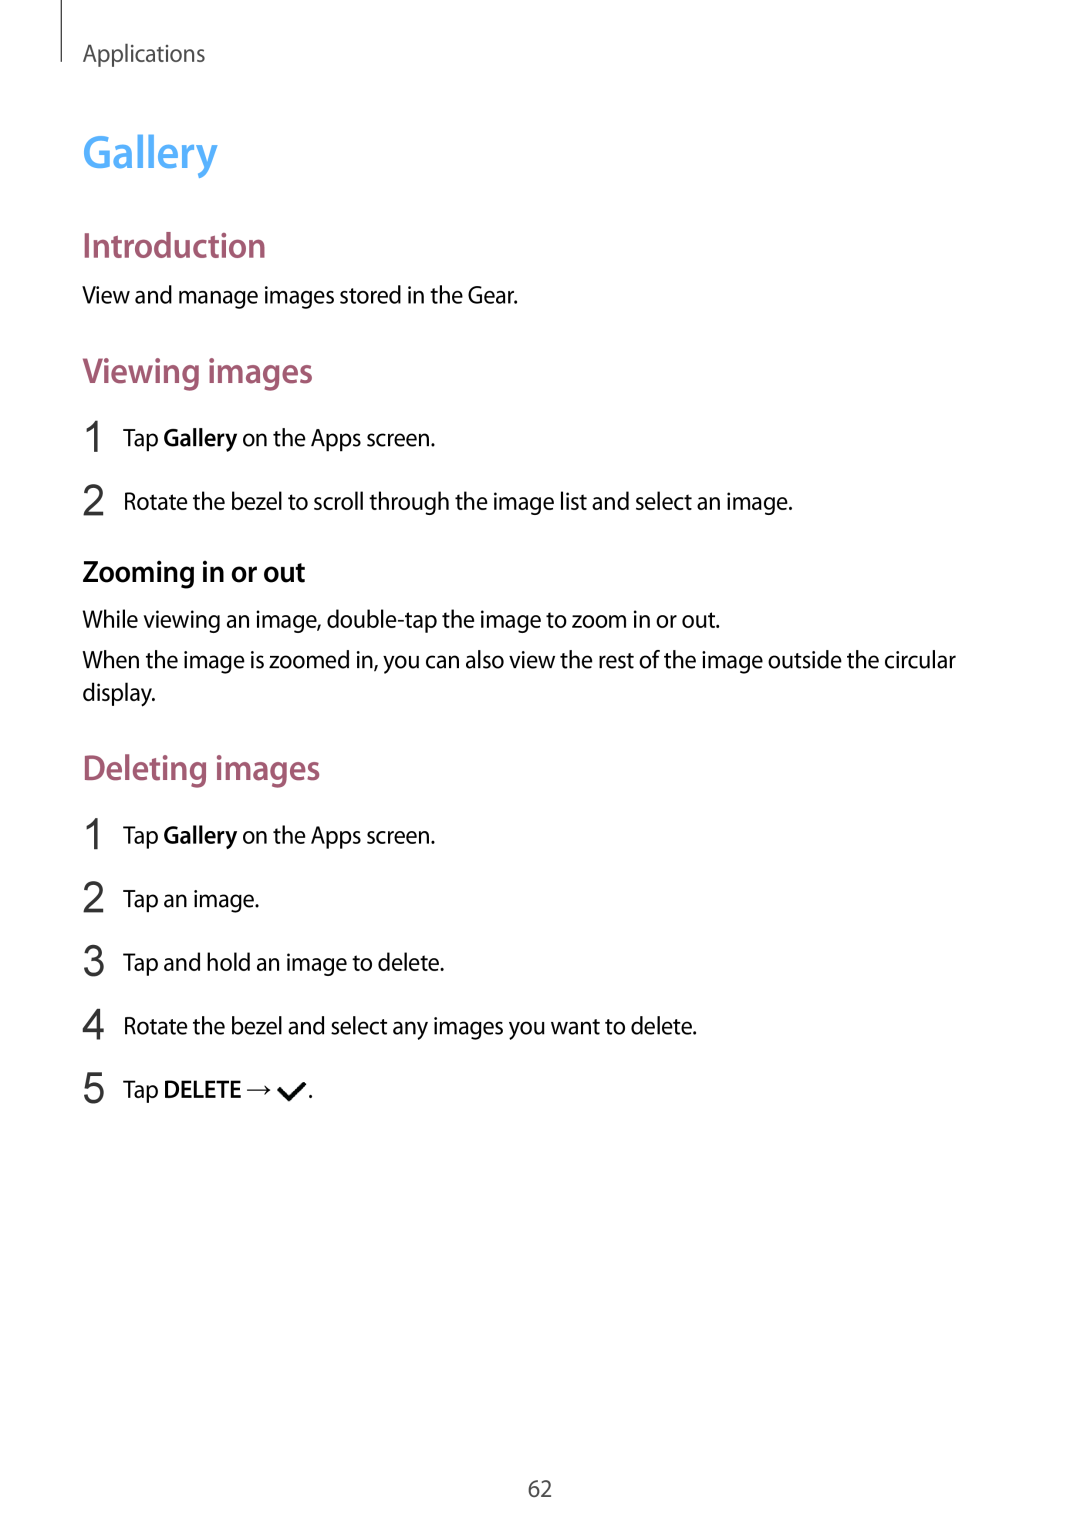 Samsung SM-R7320ZDADBT manual Gallery, Viewing images, Deleting images, Zooming in or out, Introduction, Applications 